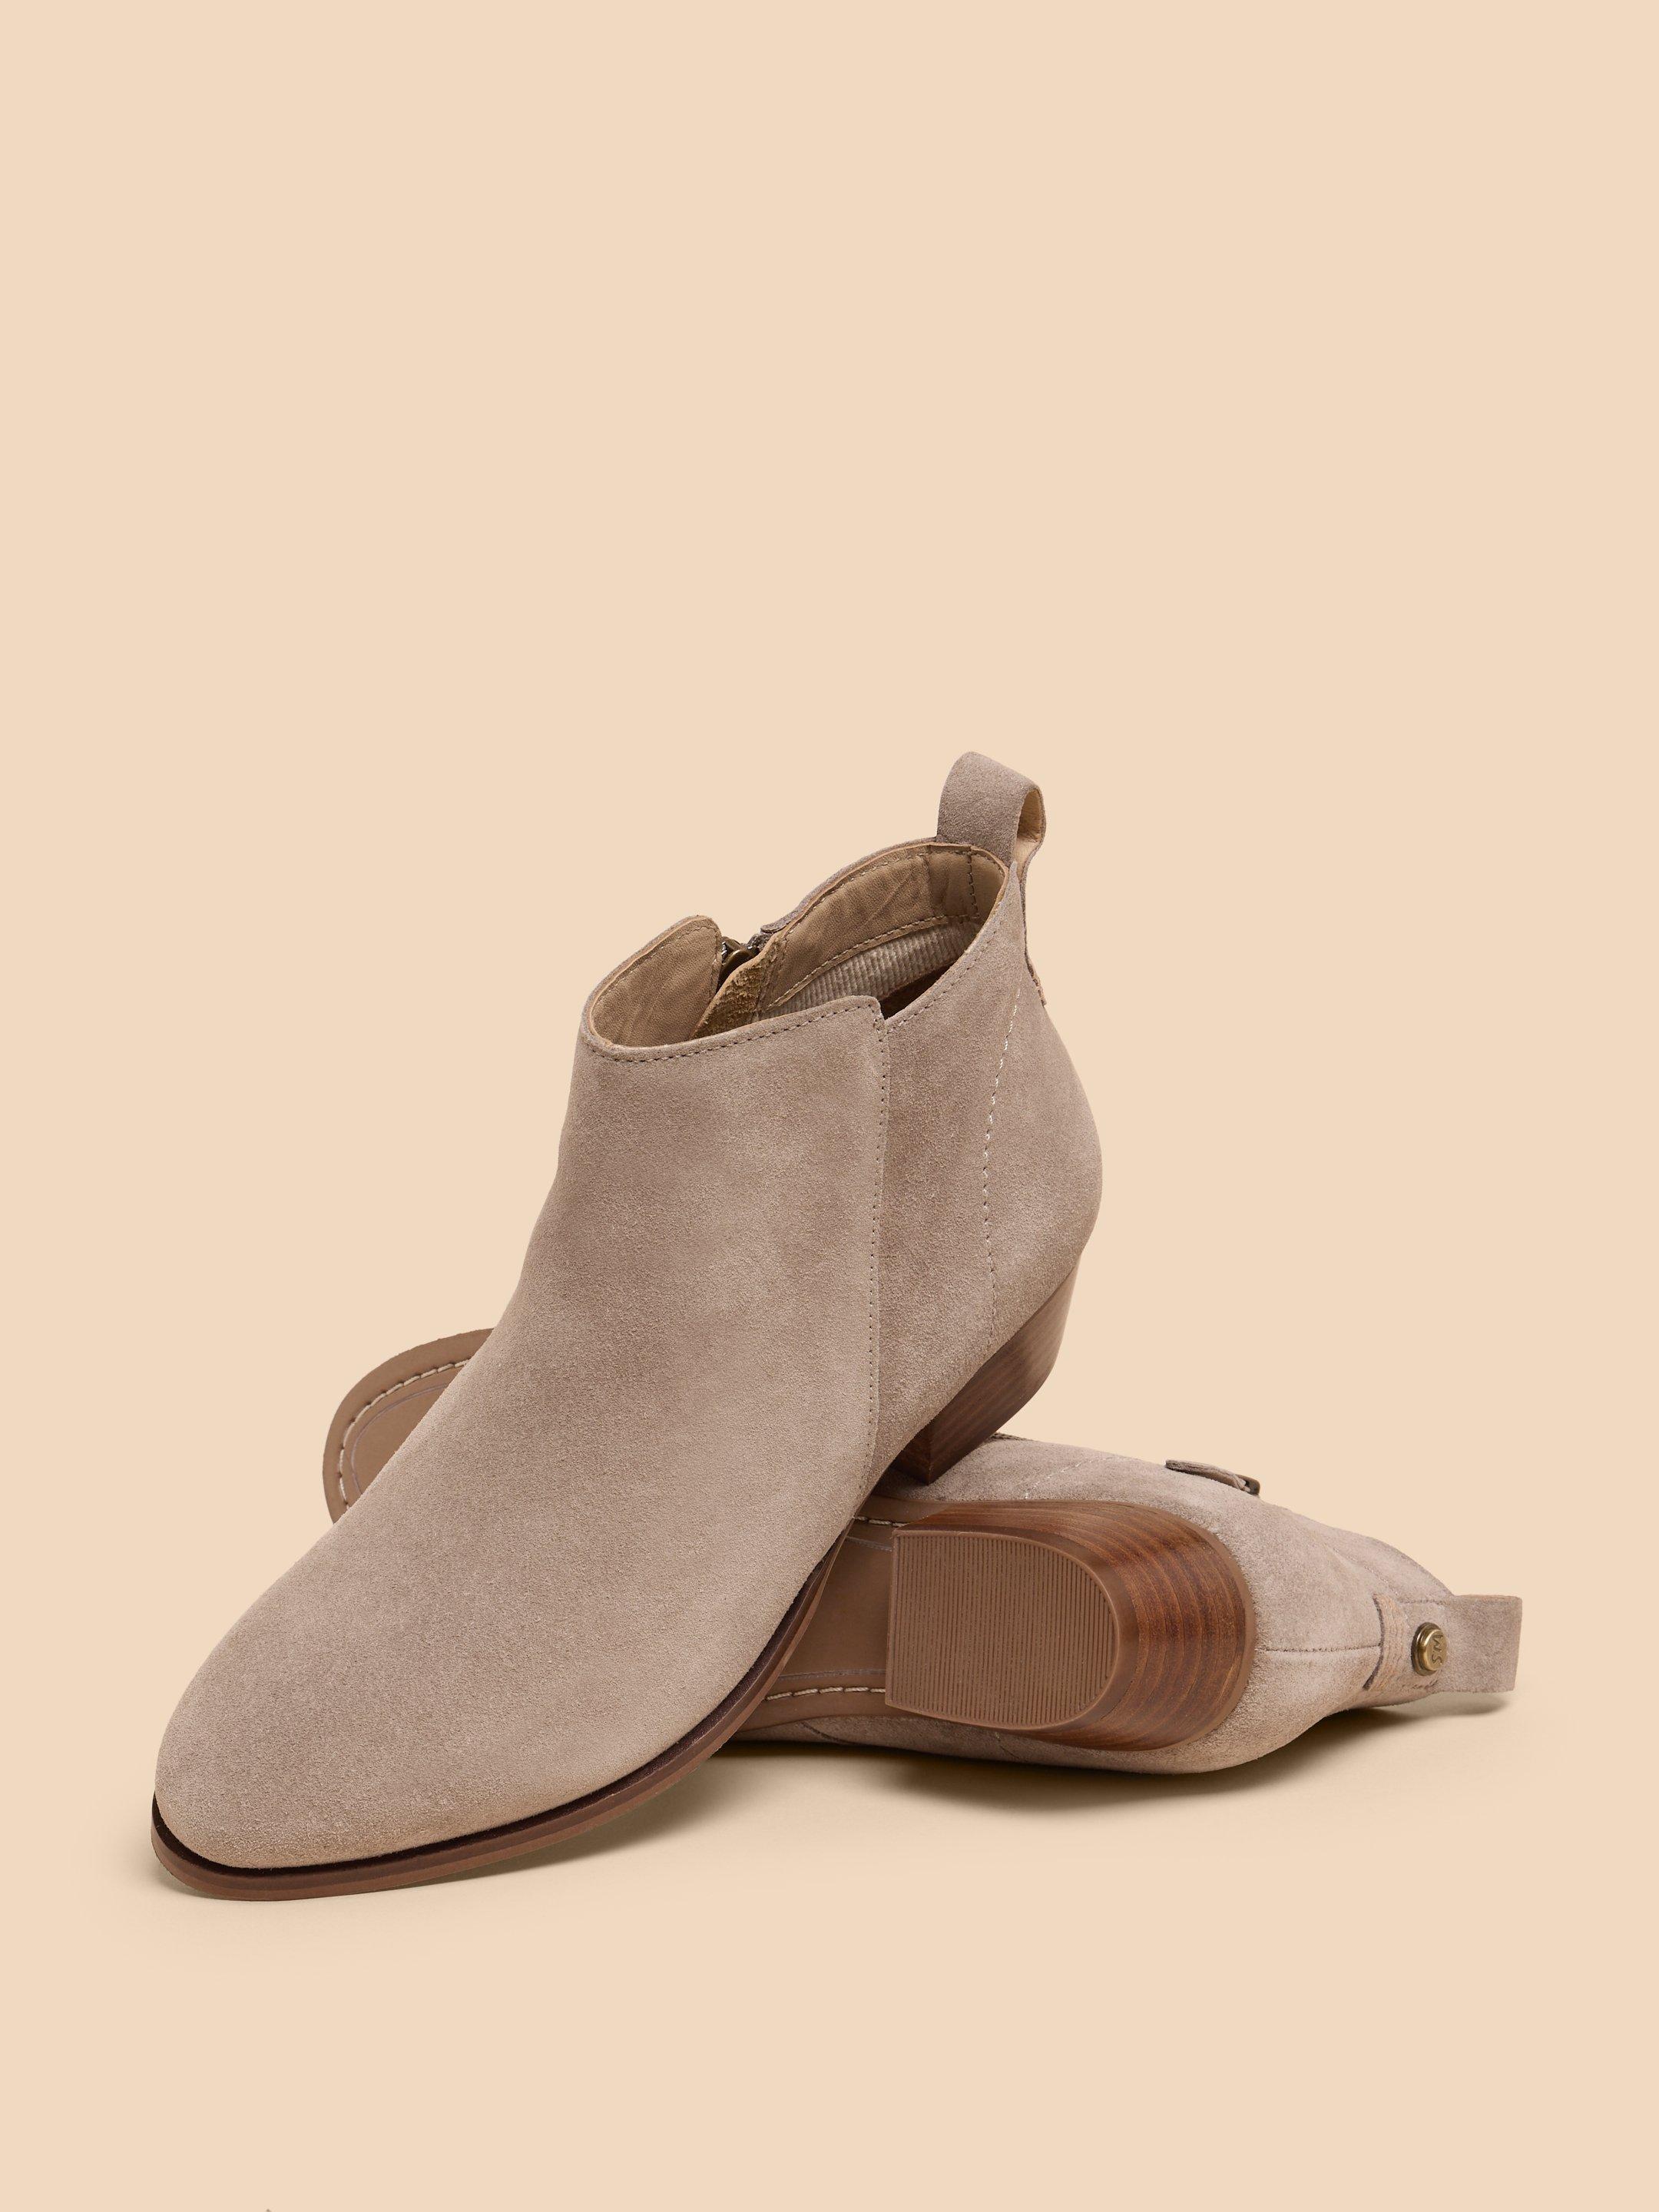 Willow Suede Ankle Boot in LGT GREY - FLAT DETAIL